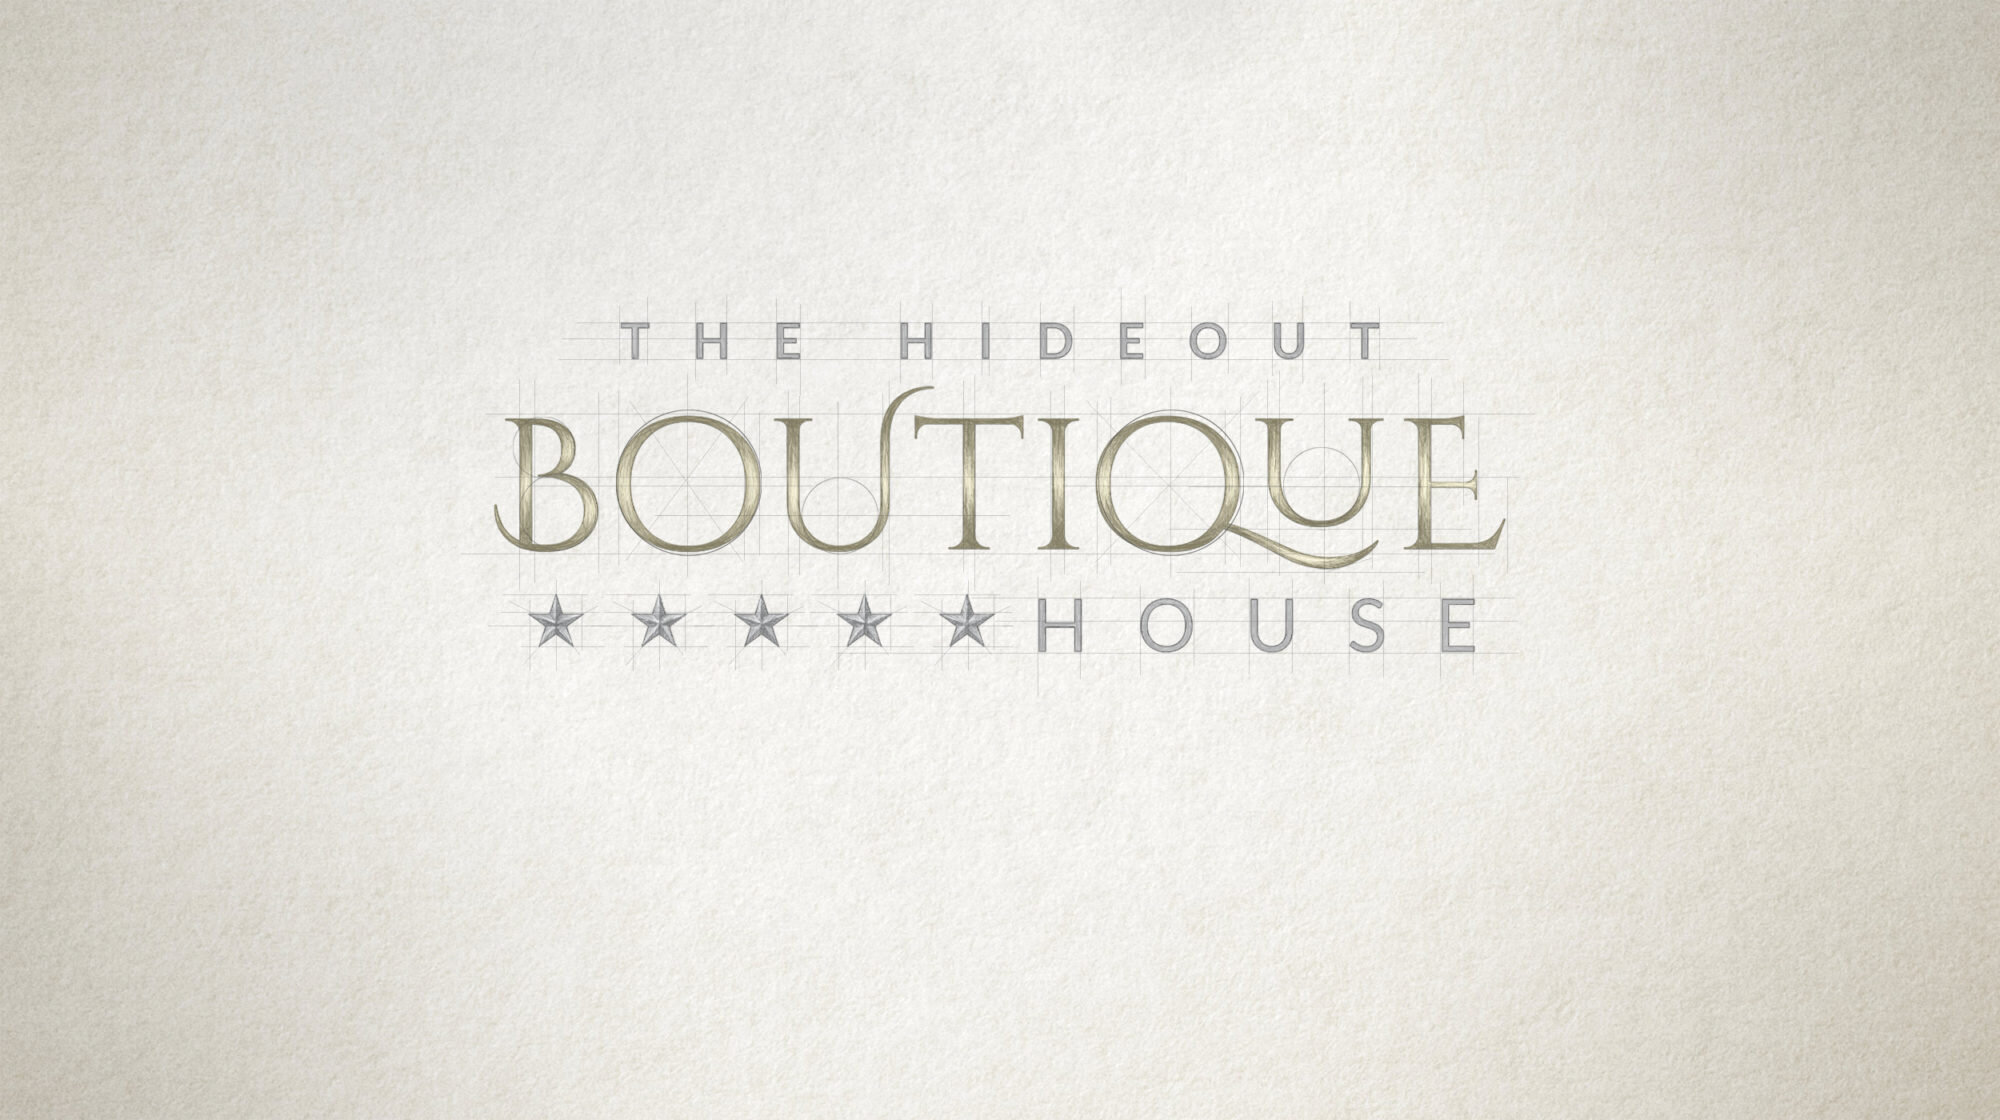 brand-strategy-design-the-hideout-boutique-house-adam-thorp-14.jpeg